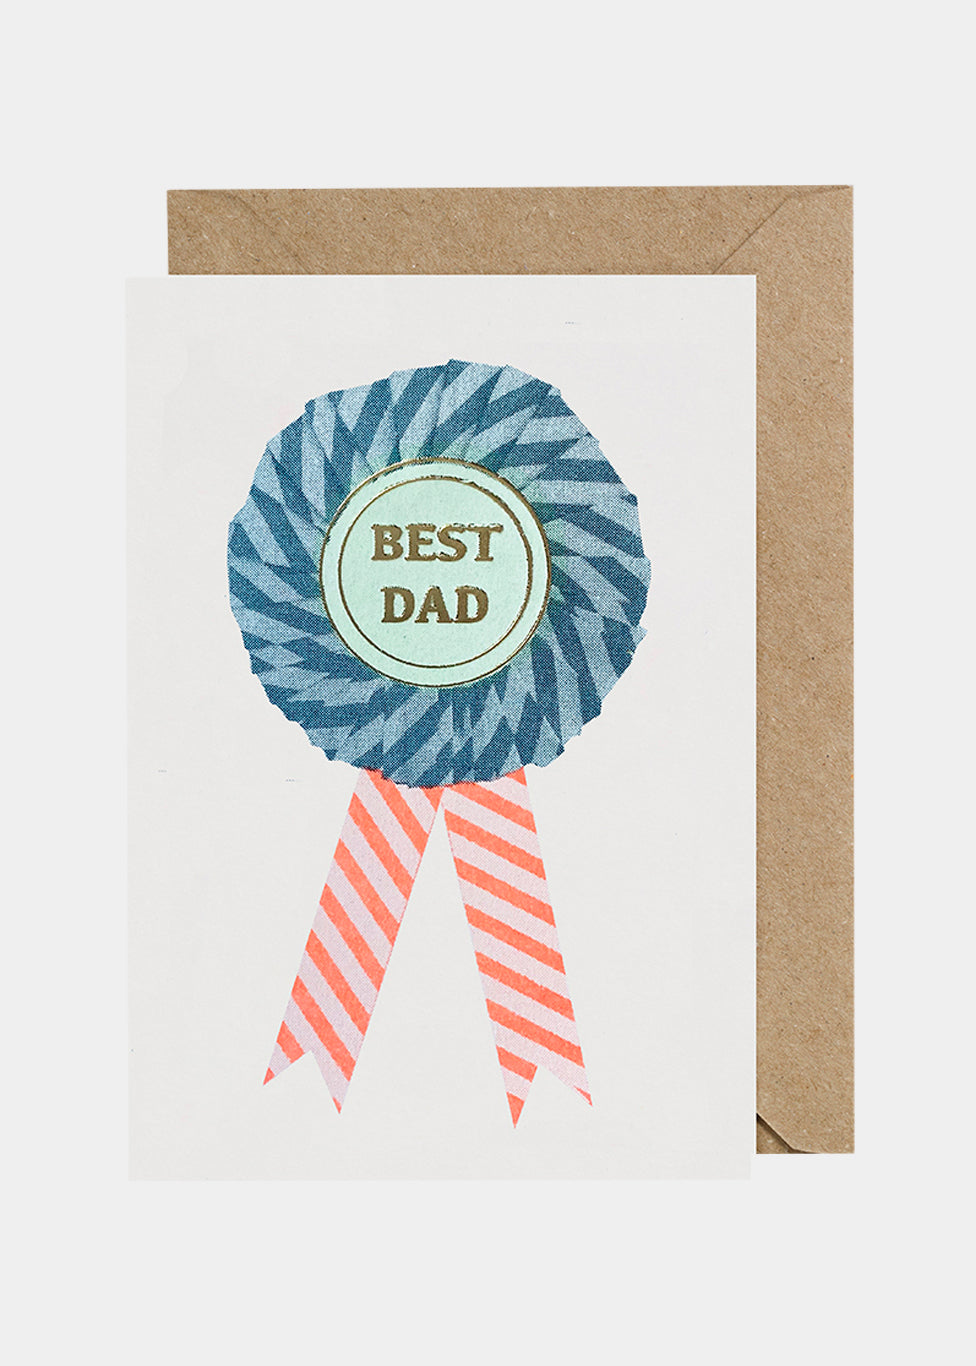 PETRA BOASE BEST DAD GREETING CARD